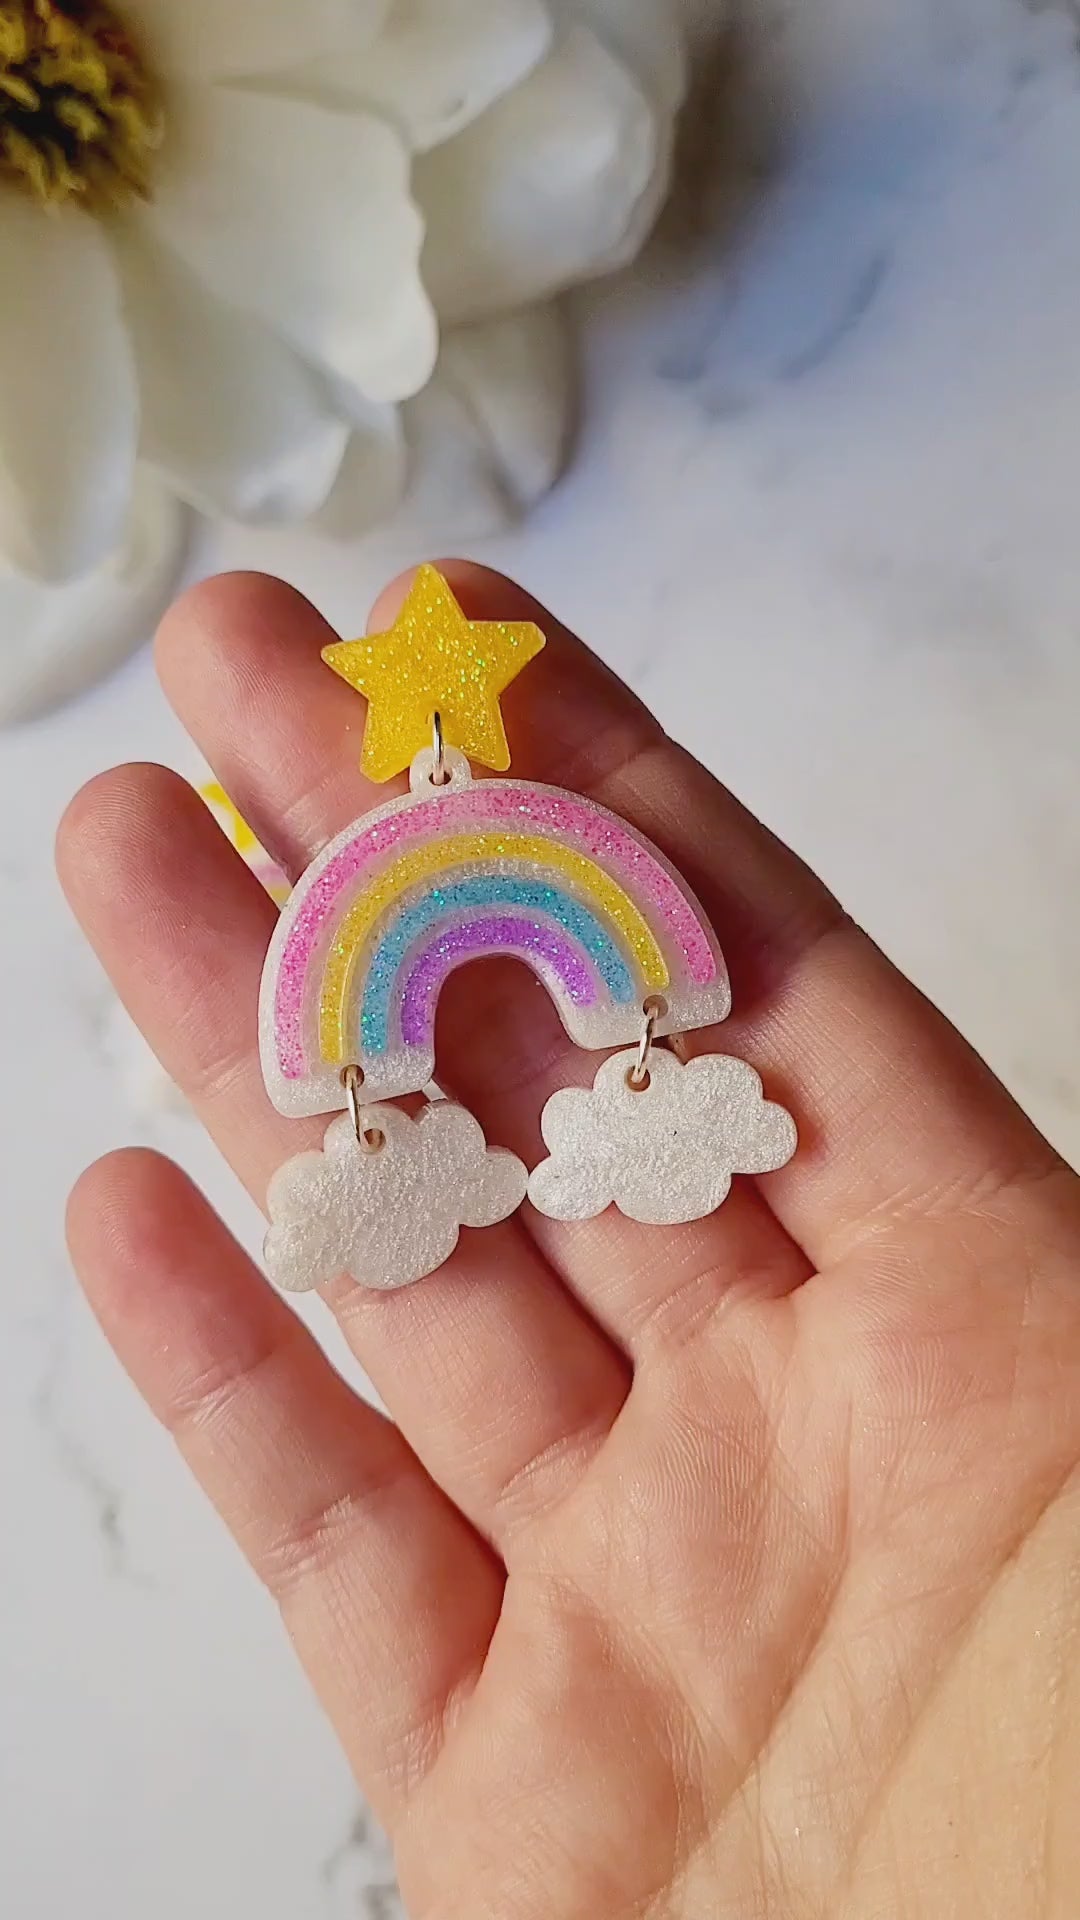 video close up of Rainbow dangle earrings with a star stud and cloud charms on a marble background with foliage.